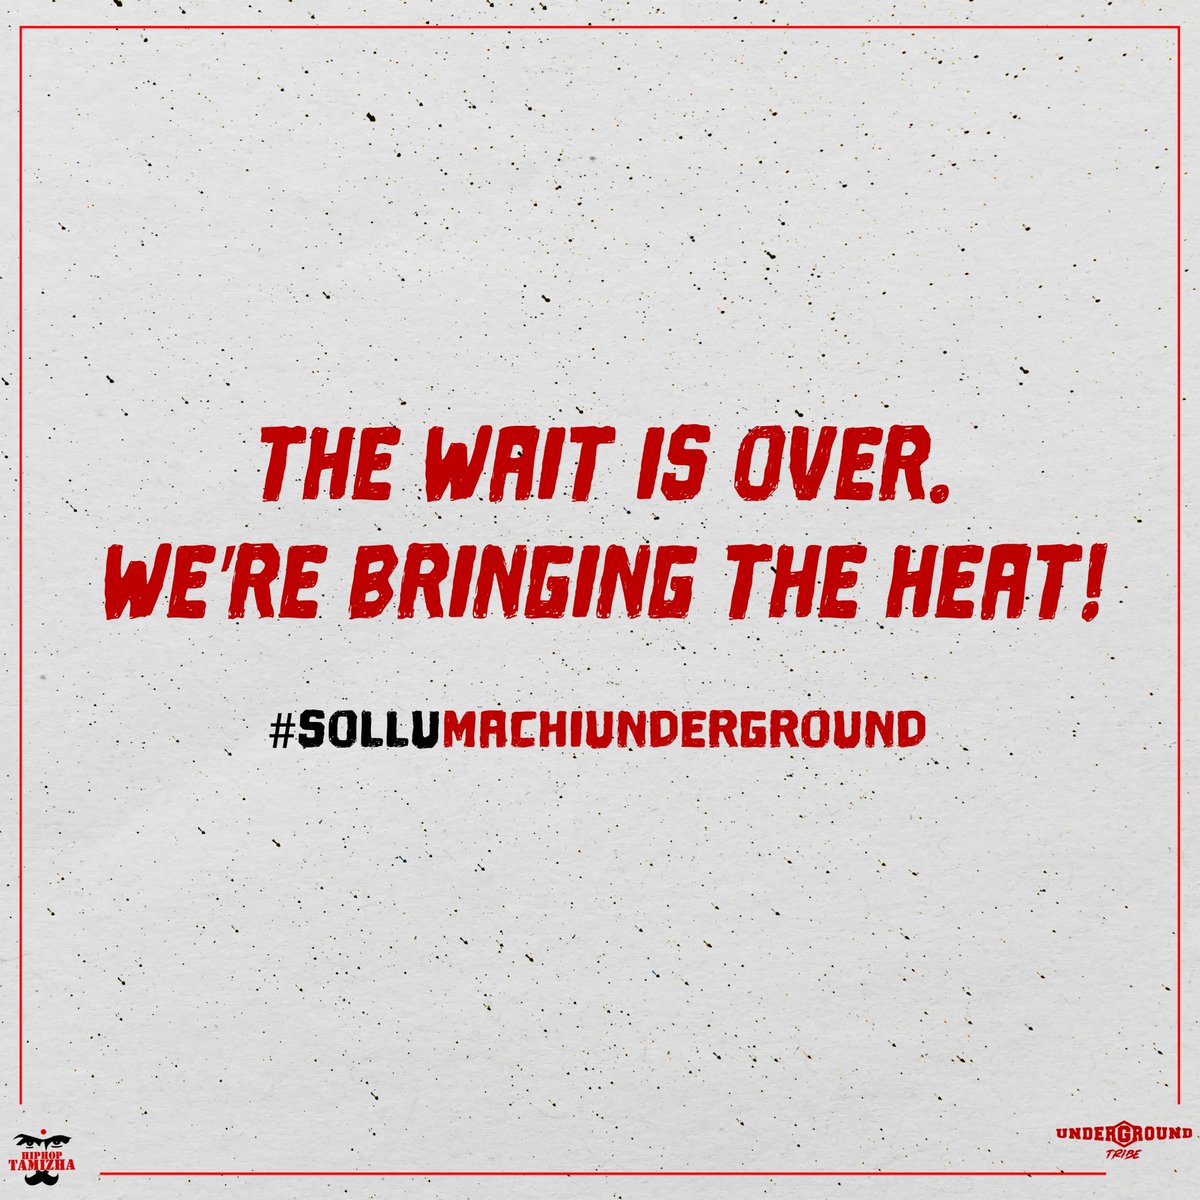 Get ready to witness the revolution of a new era in The Underground Music Scene – we’re back and bringing the heat! 🔥🎤 #sollumachiunderground